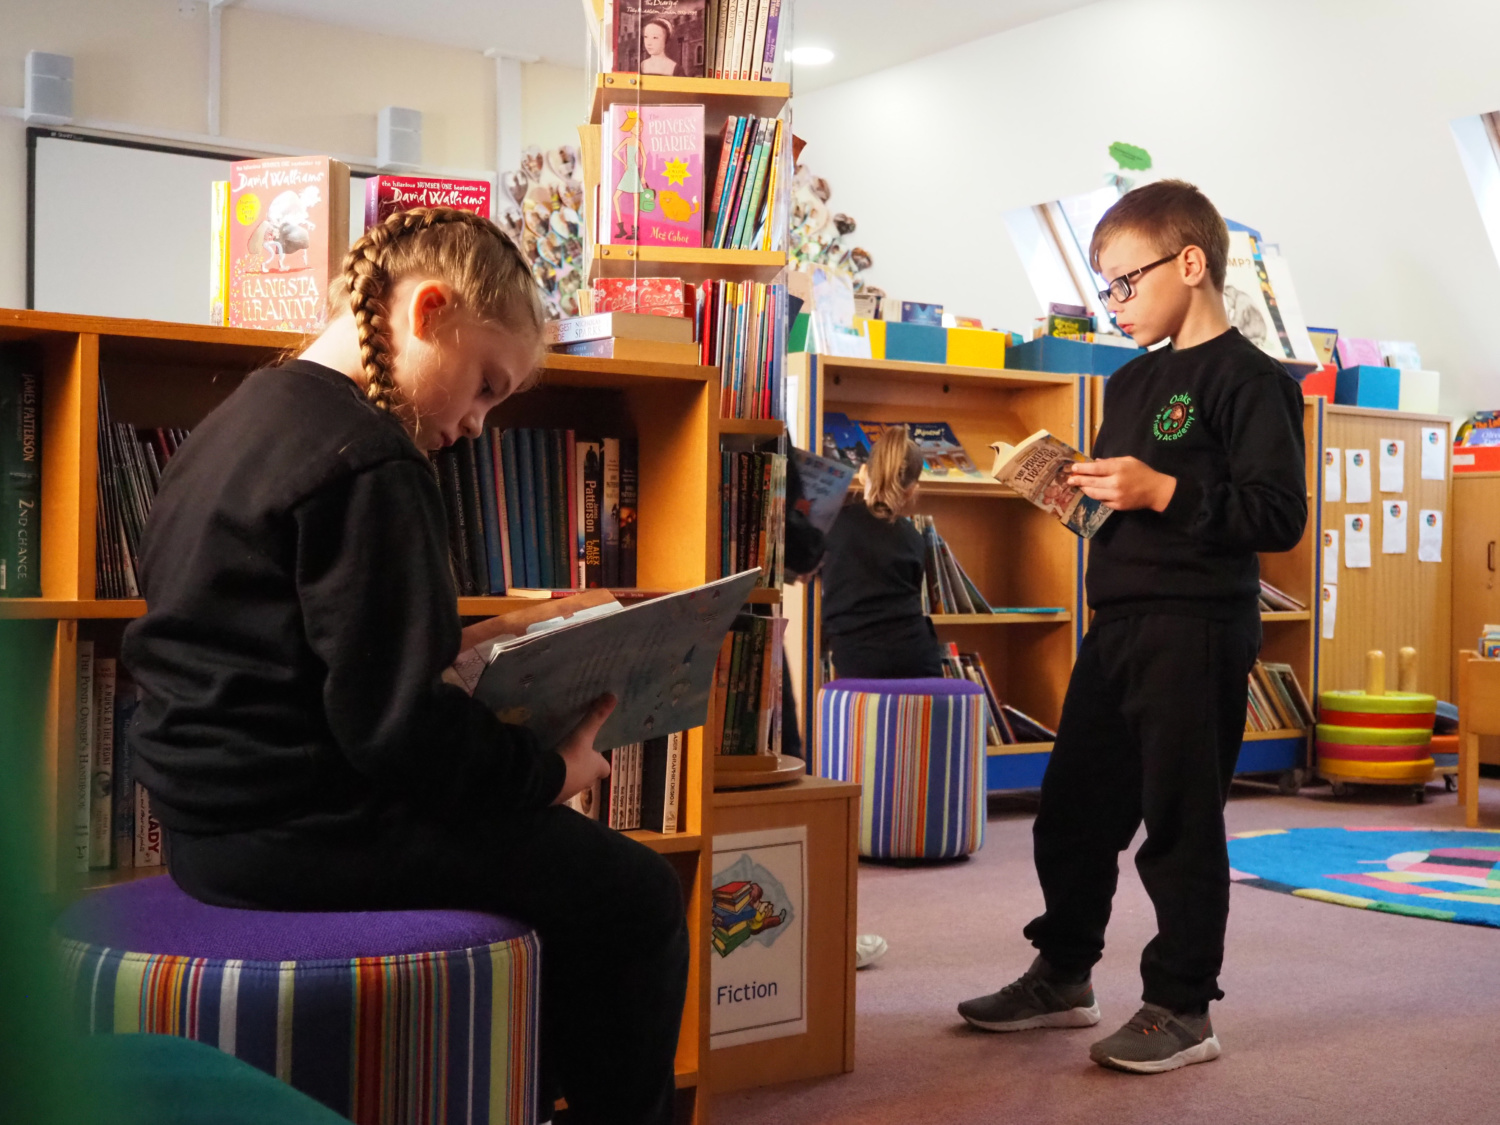 A girl and boy are seen browsing books together in the academy library.